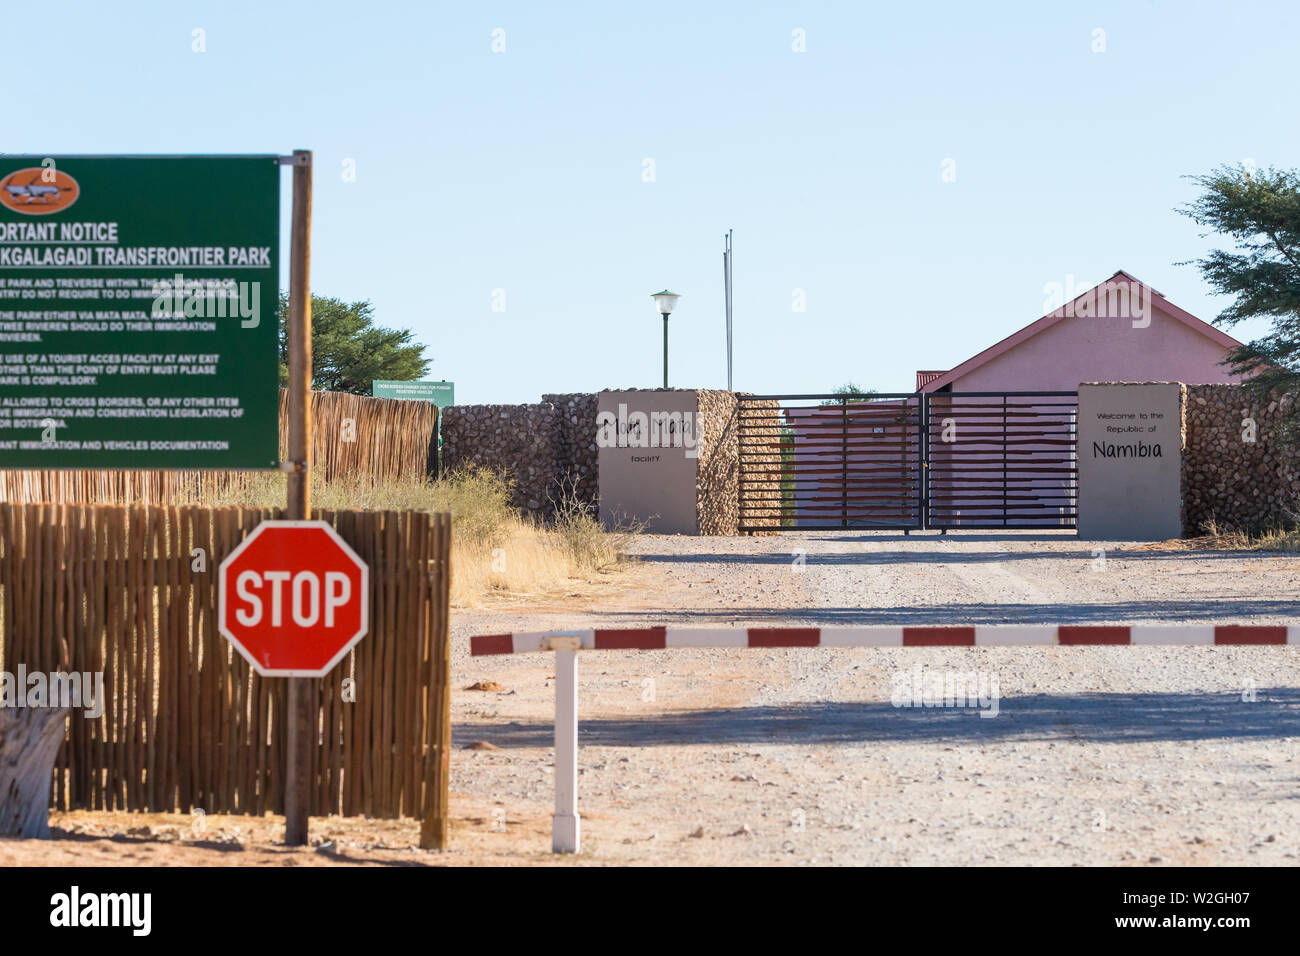 Border control post tourist access facility for Namibia at Mata Mata rest camp in the Kgalagadi Transfrontier Park, South Africa Stock Photo